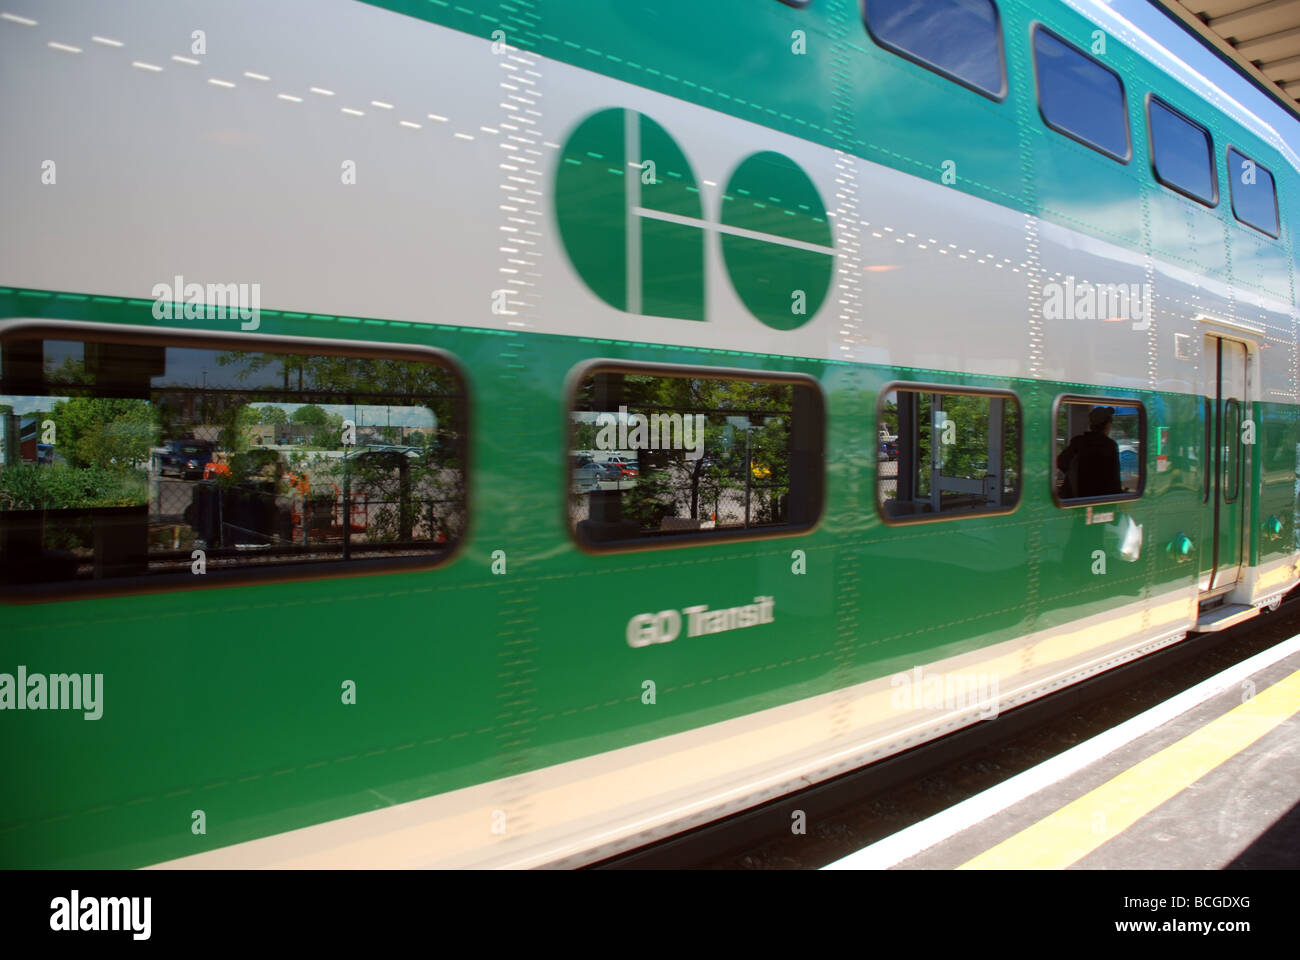 GO transit commuter train in motion Stock Photo